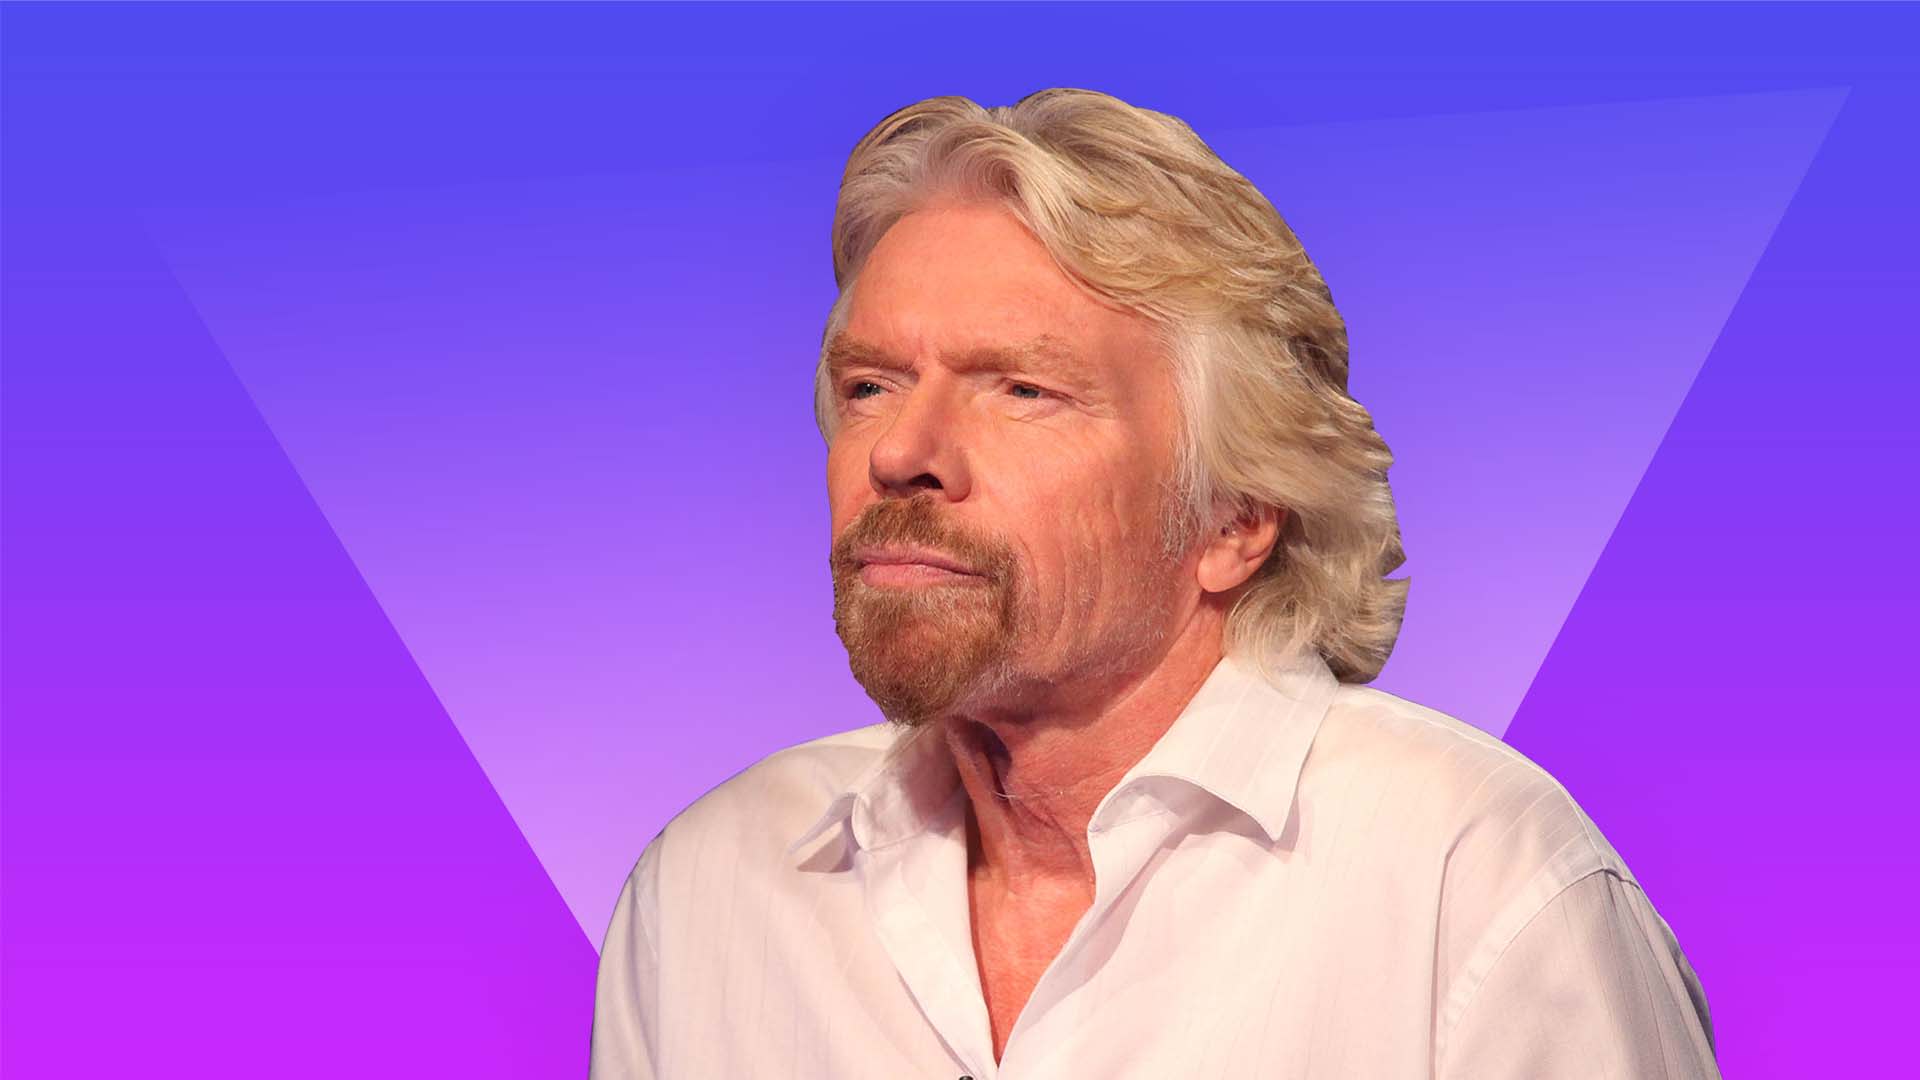 Want to Start a Business but Haven't? Richard Branson Has the Perfect Advice for You